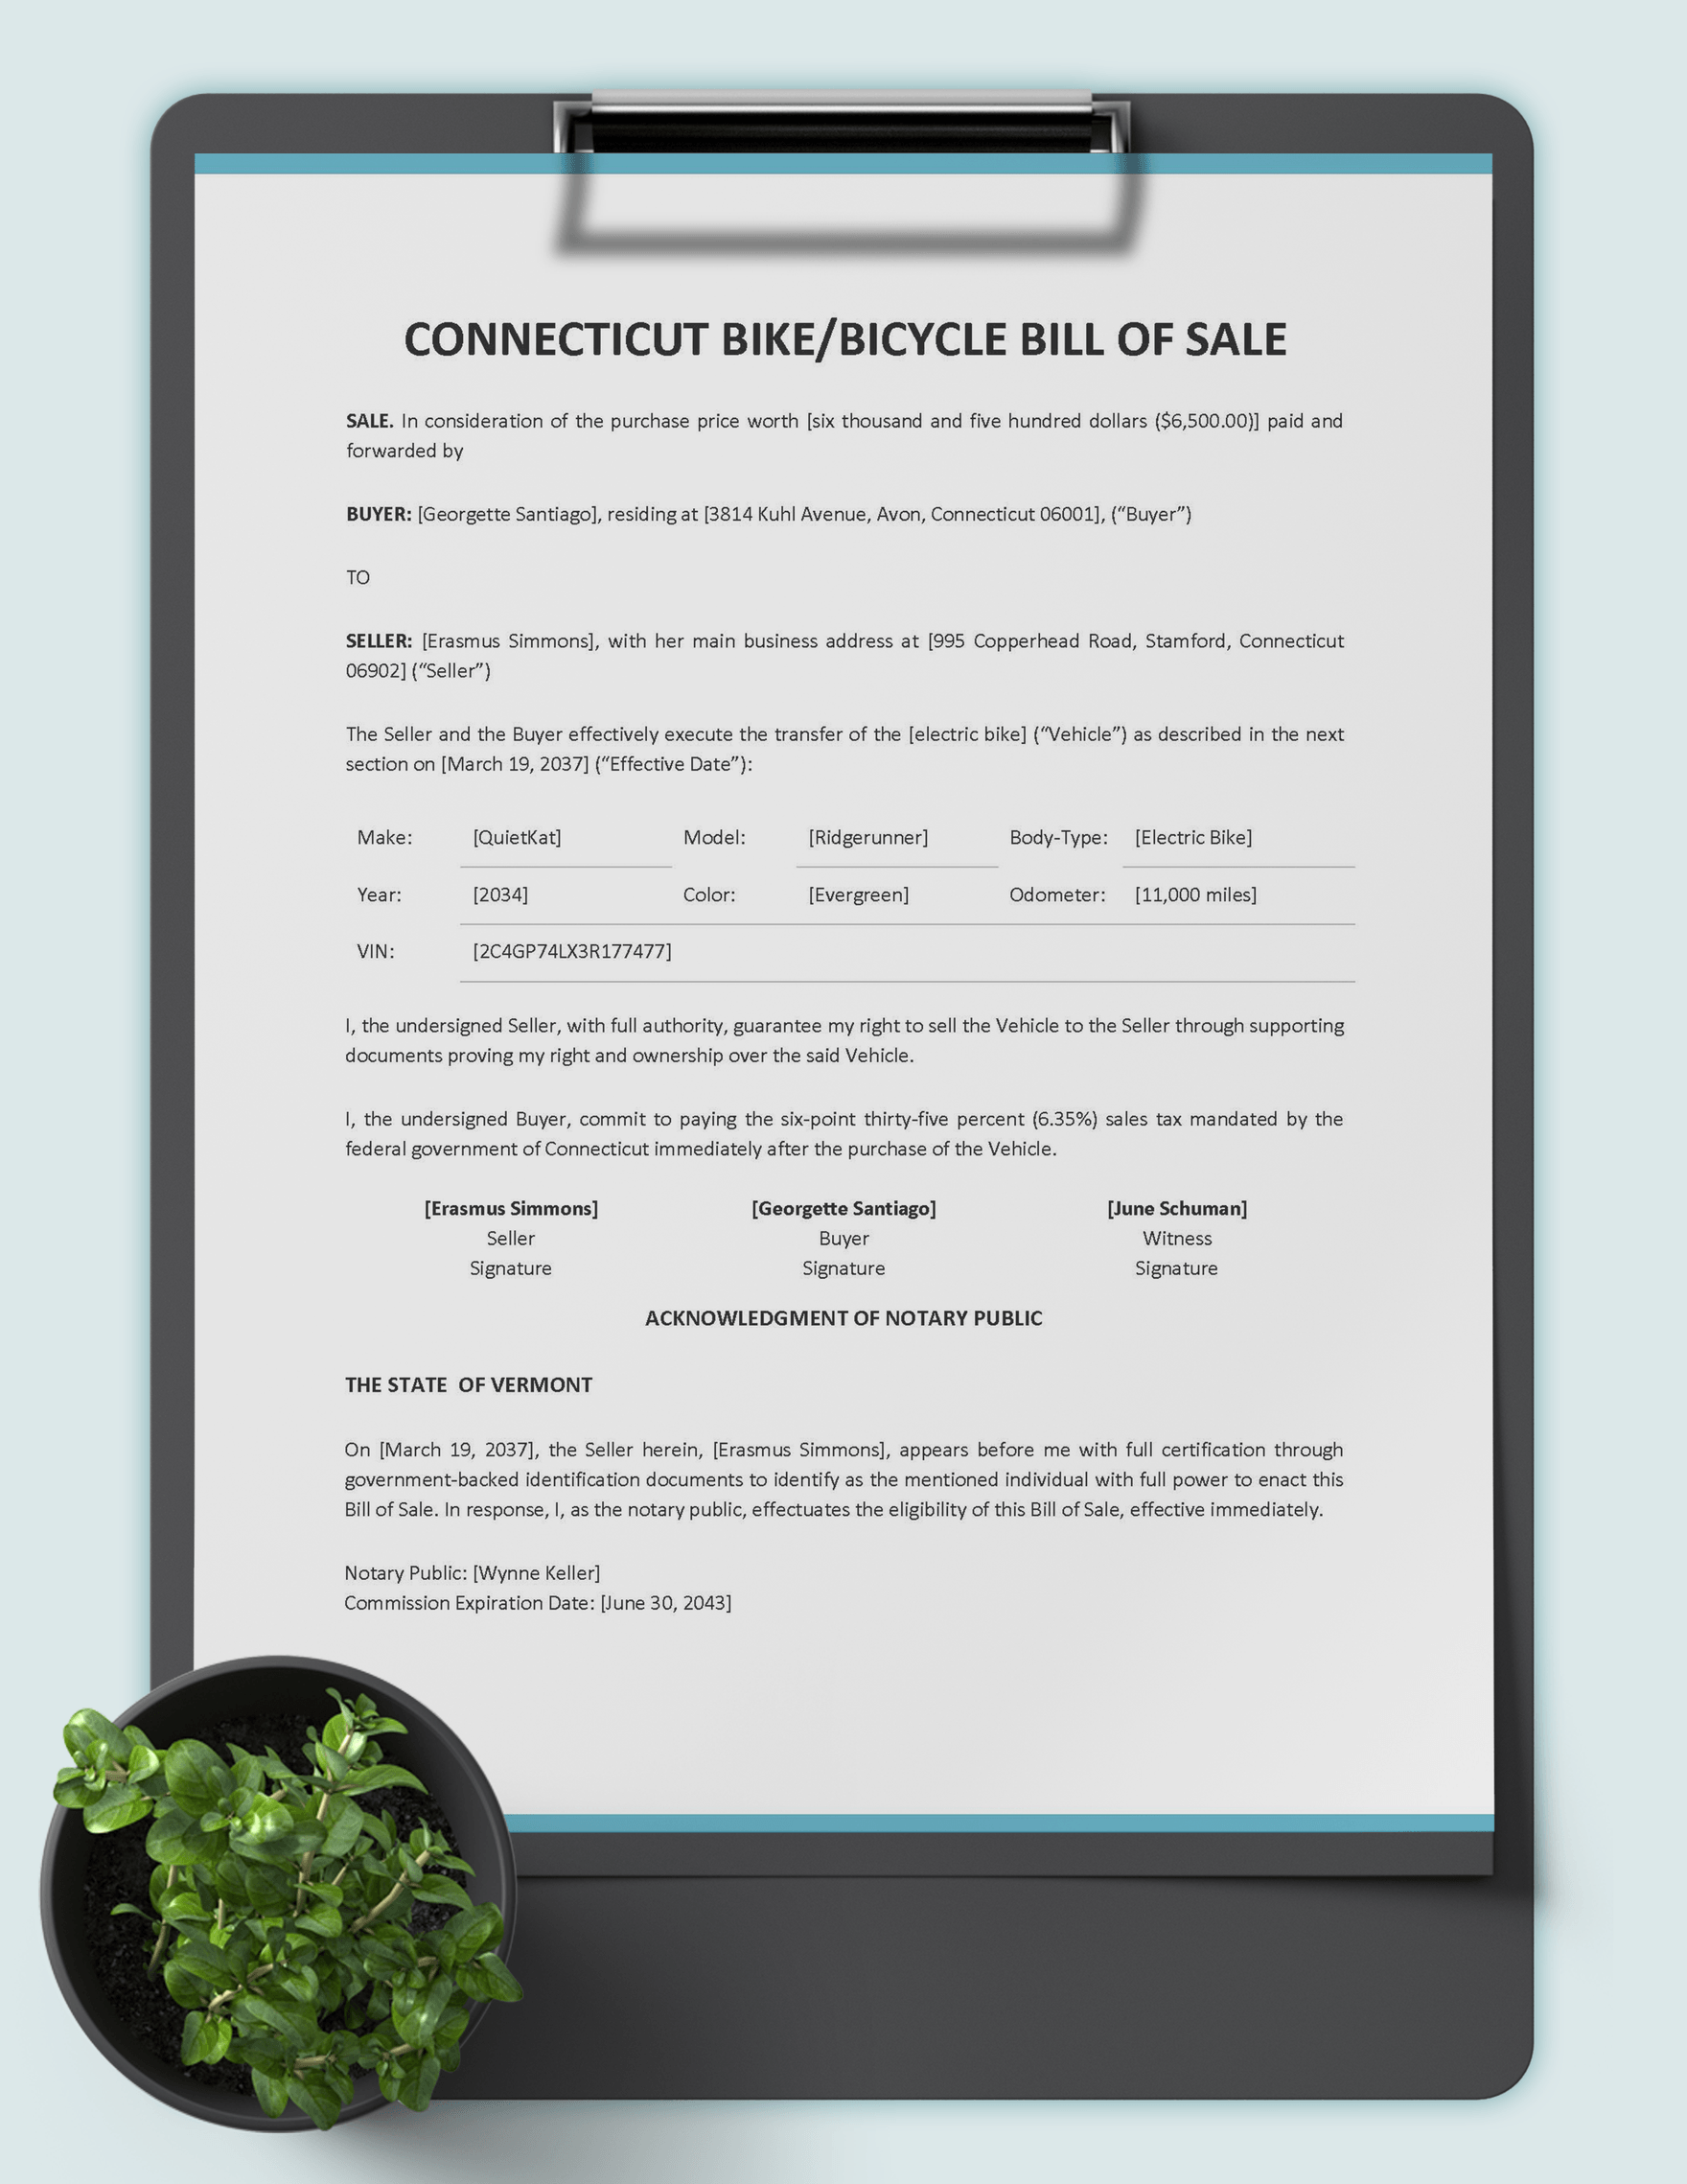 Connecticut Bike/ Bicycle Bill of Sale Template